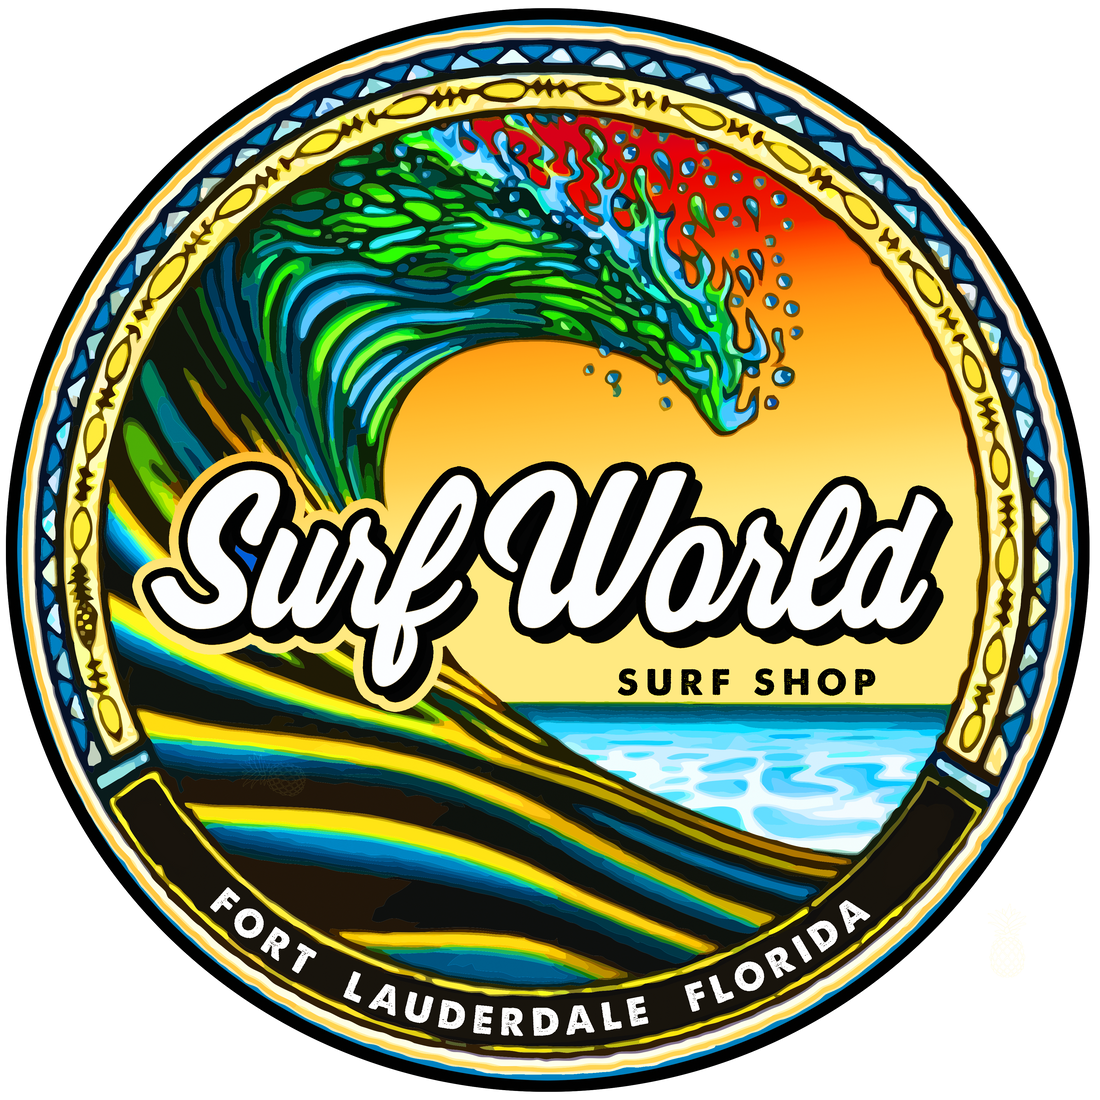 "Traveling surfers' guide to shopping for Surf gear in Florida"